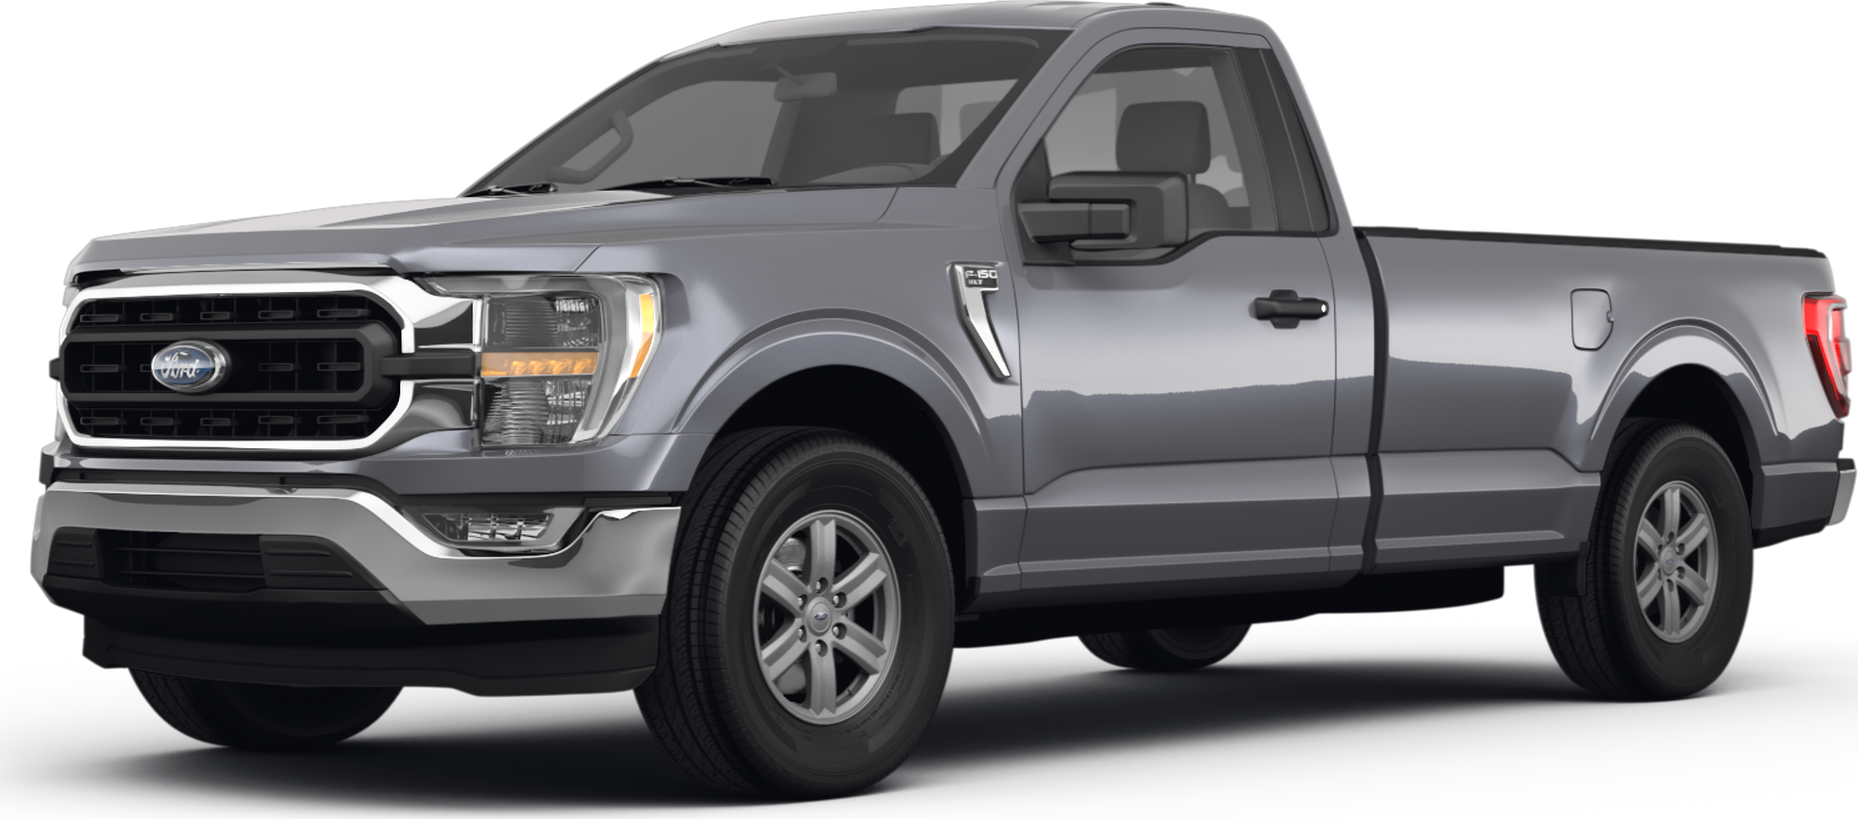 2022 Ford F150 Regular Cab Price, Value, Ratings & Reviews Kelley